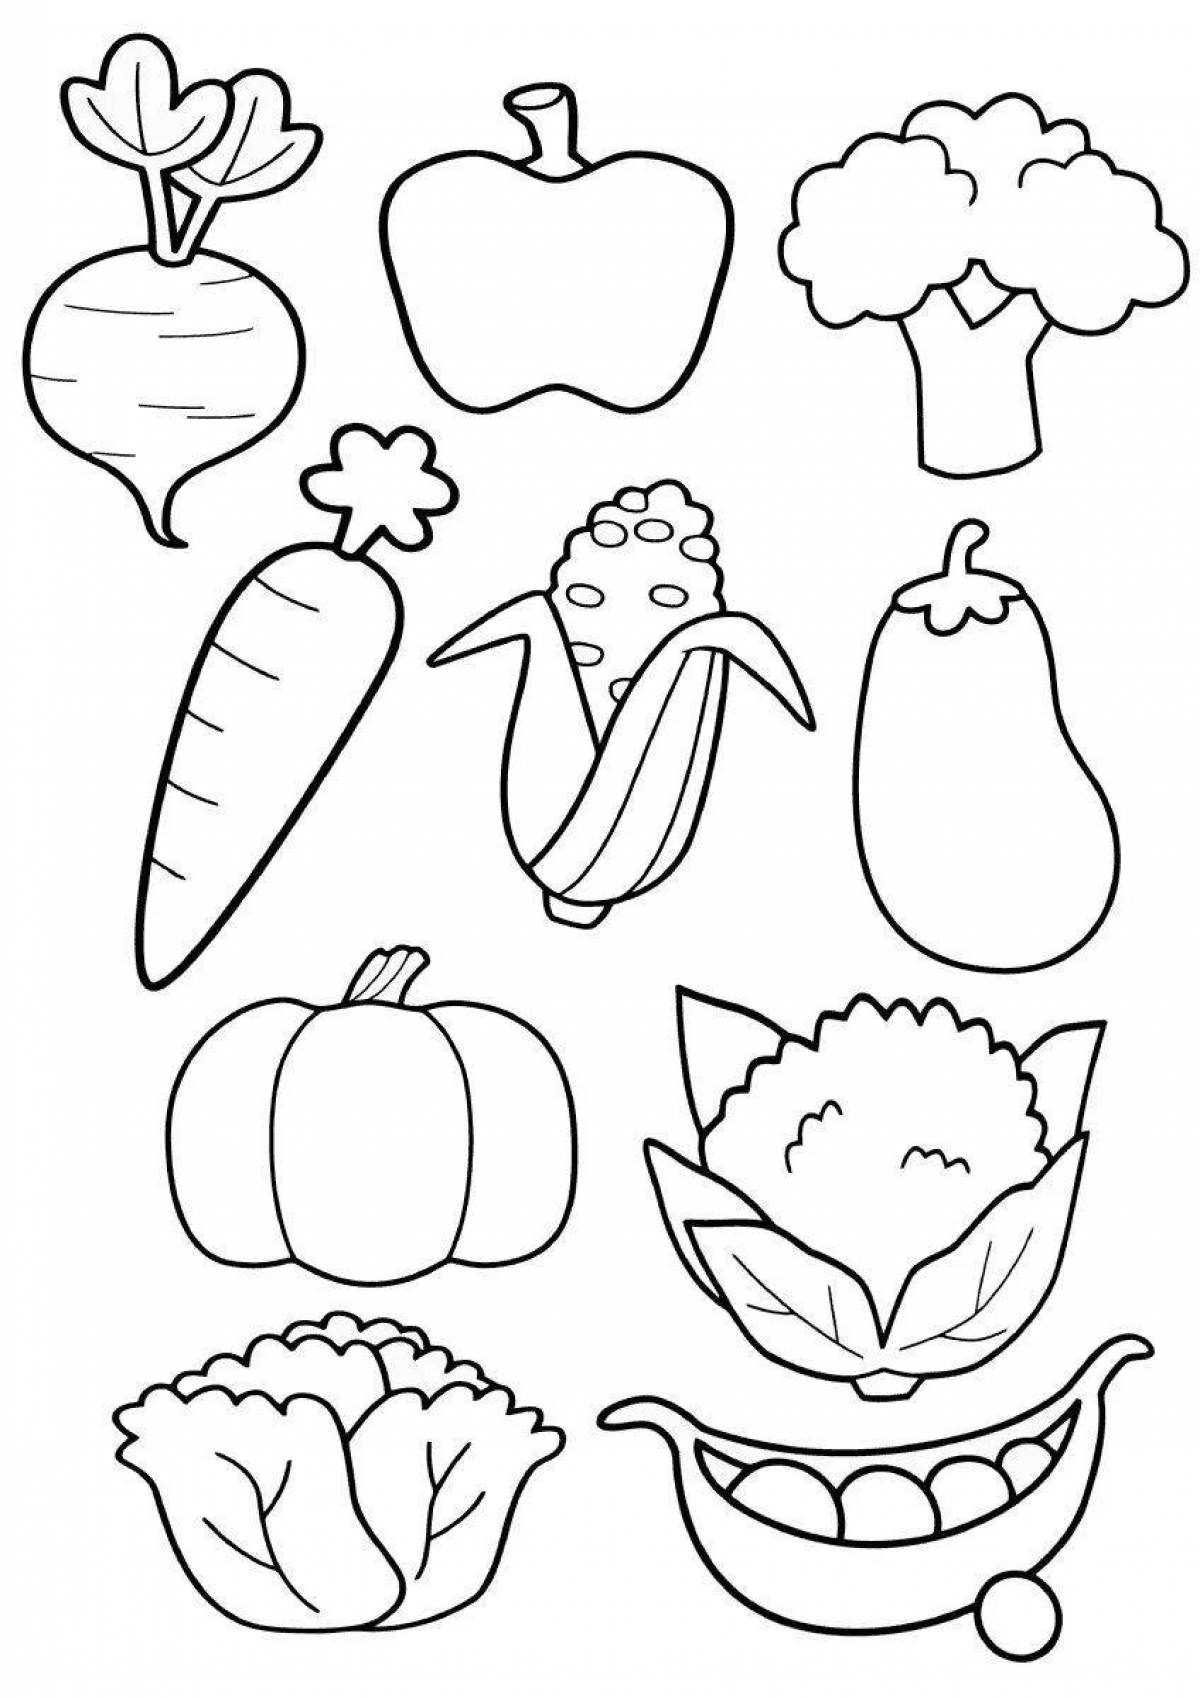 Fun coloring pages